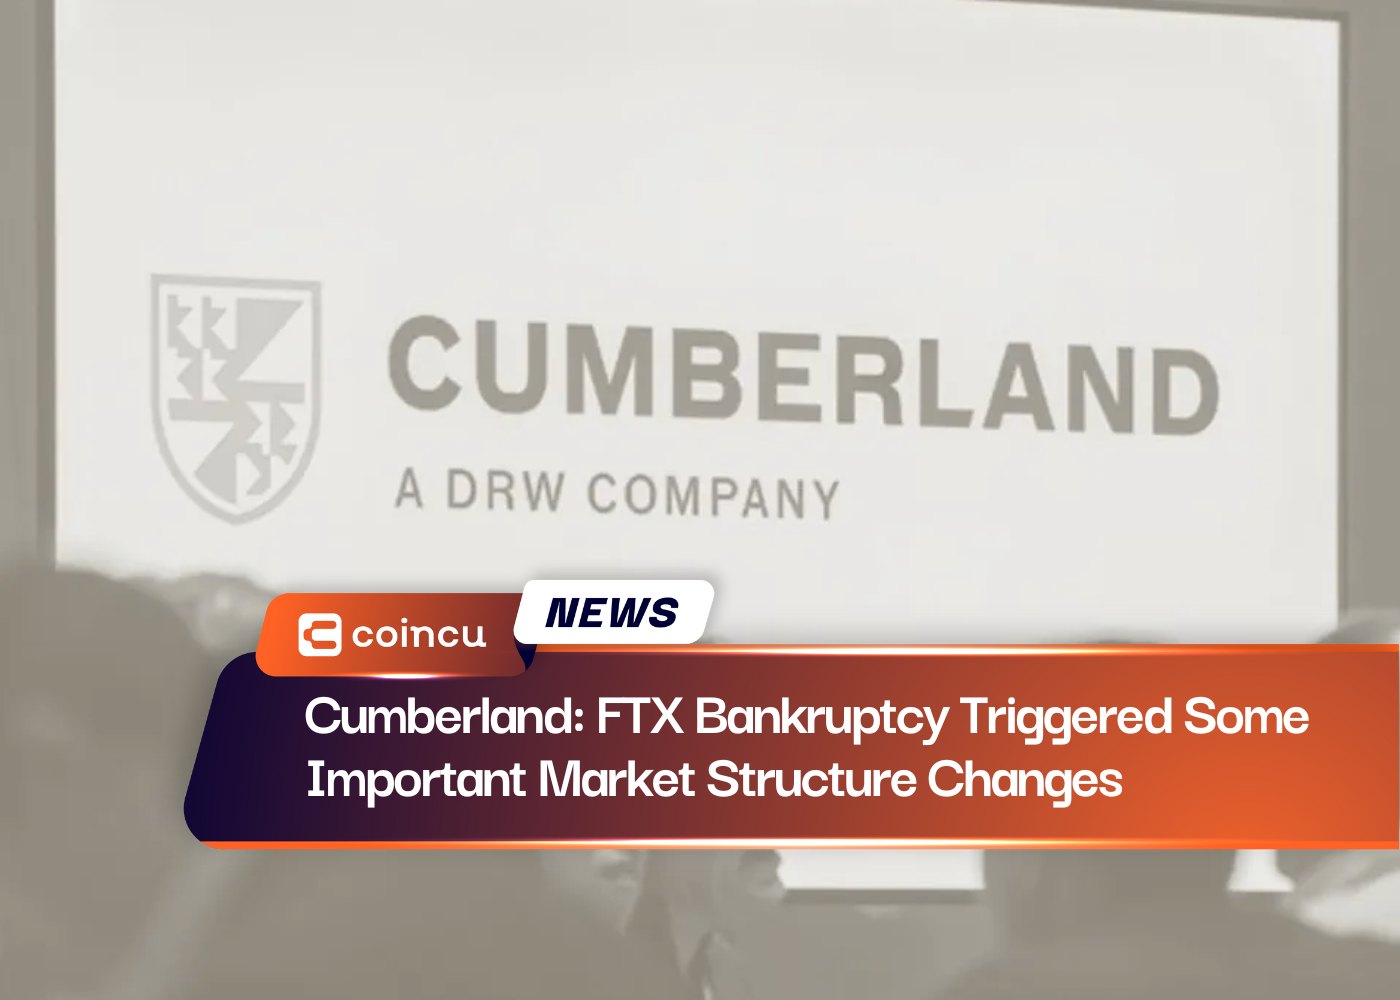 Cumberland: FTX Bankruptcy Triggered Some Important Market Structure Changes